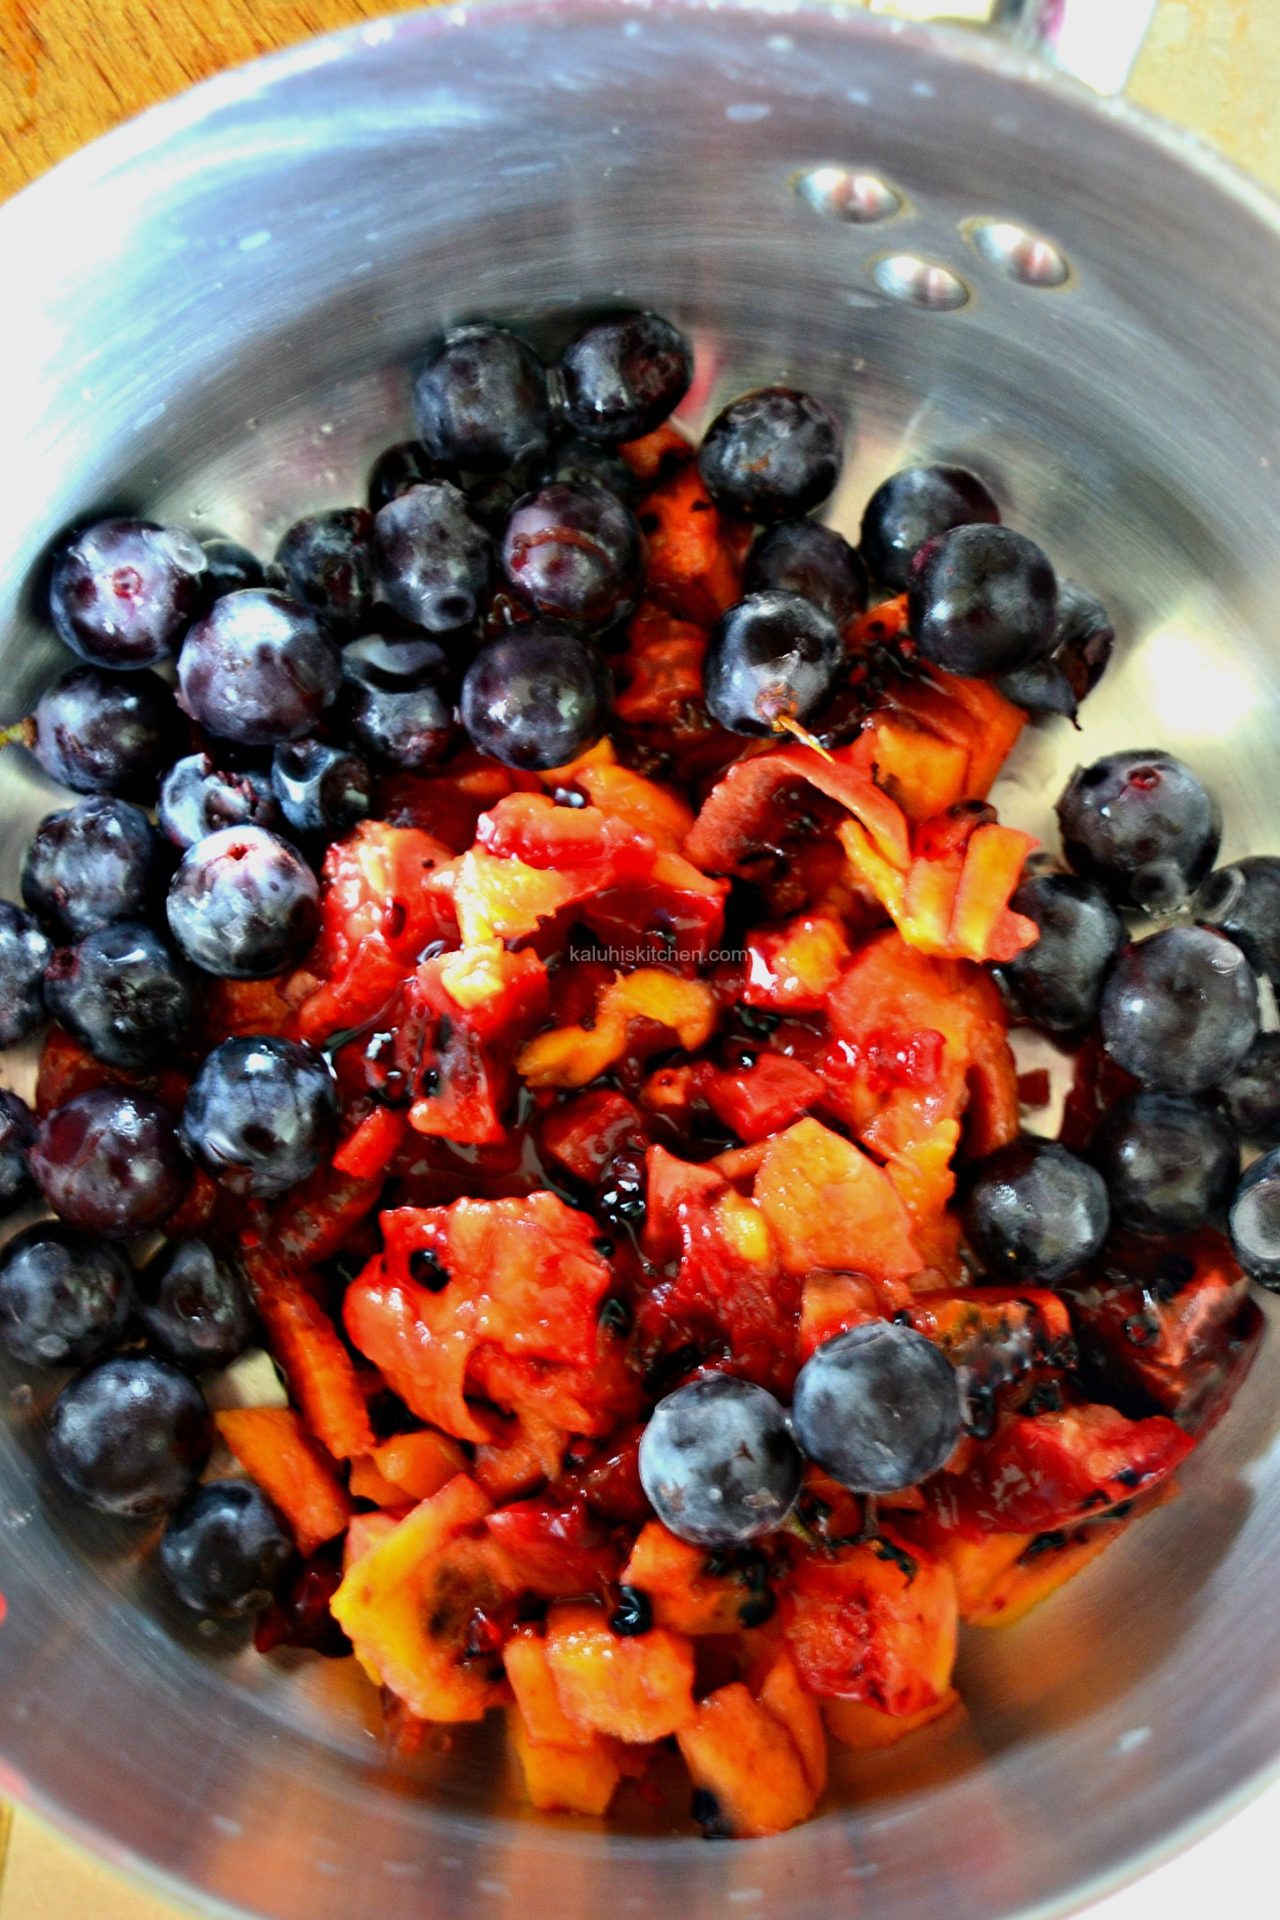 to make your jam, put the berries in a pan together with some sugar and 5 tabelspoons of granulated sugar_tree tomato and grape jam_kaluhiskitchen.com